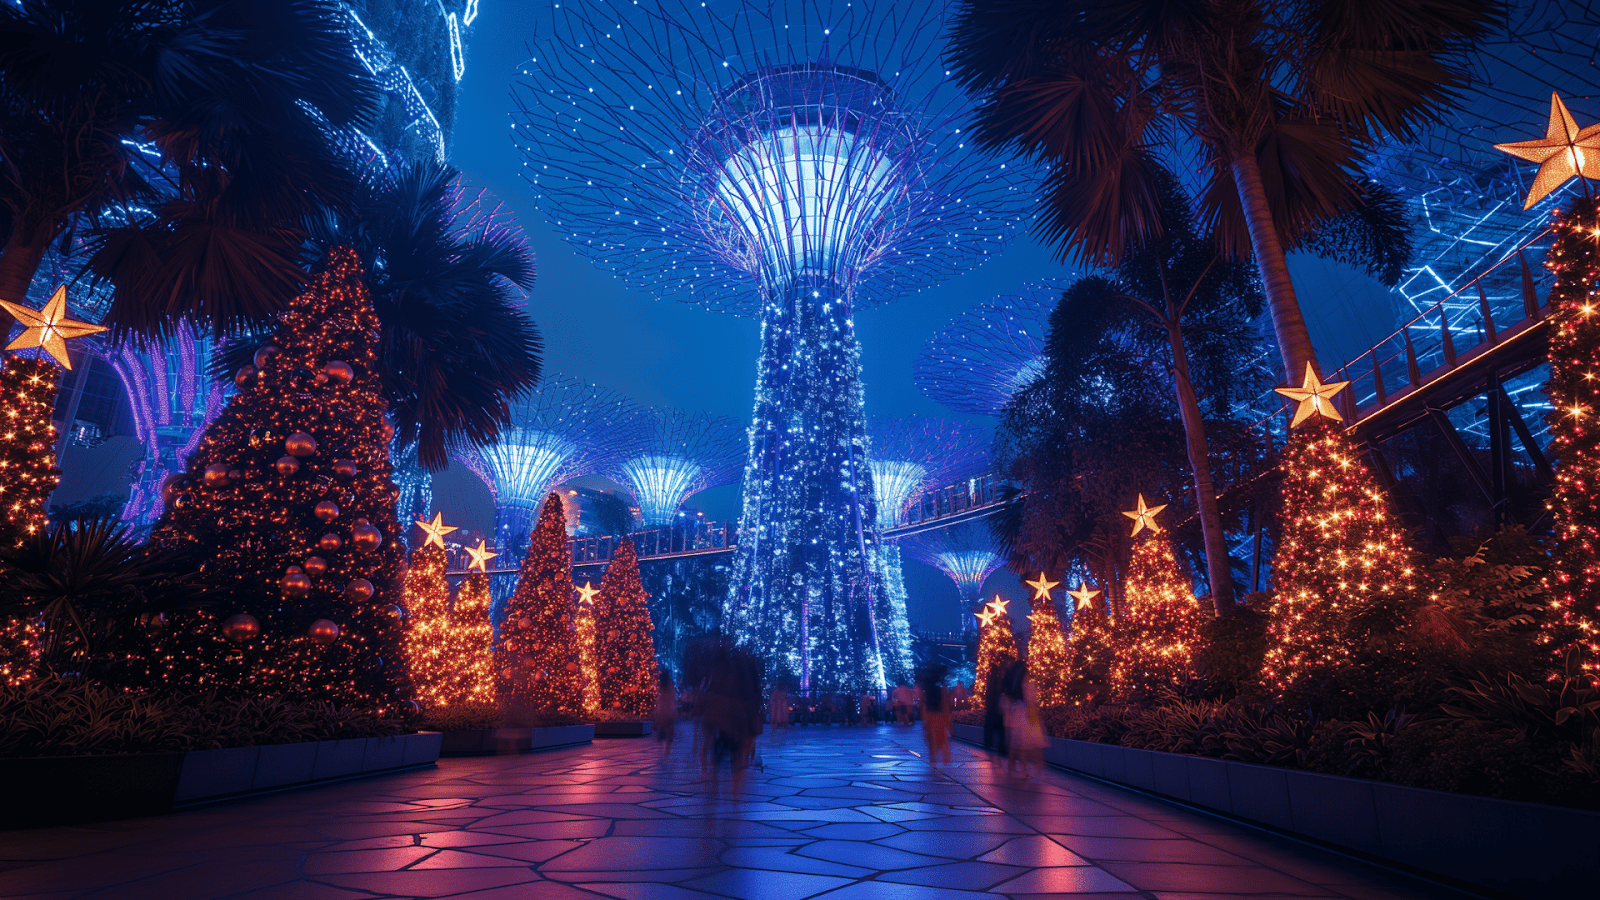 Christmas trees and decorations with star-shaped lights among futuristic tree-like structures at Gardens by the Bay, Singapore